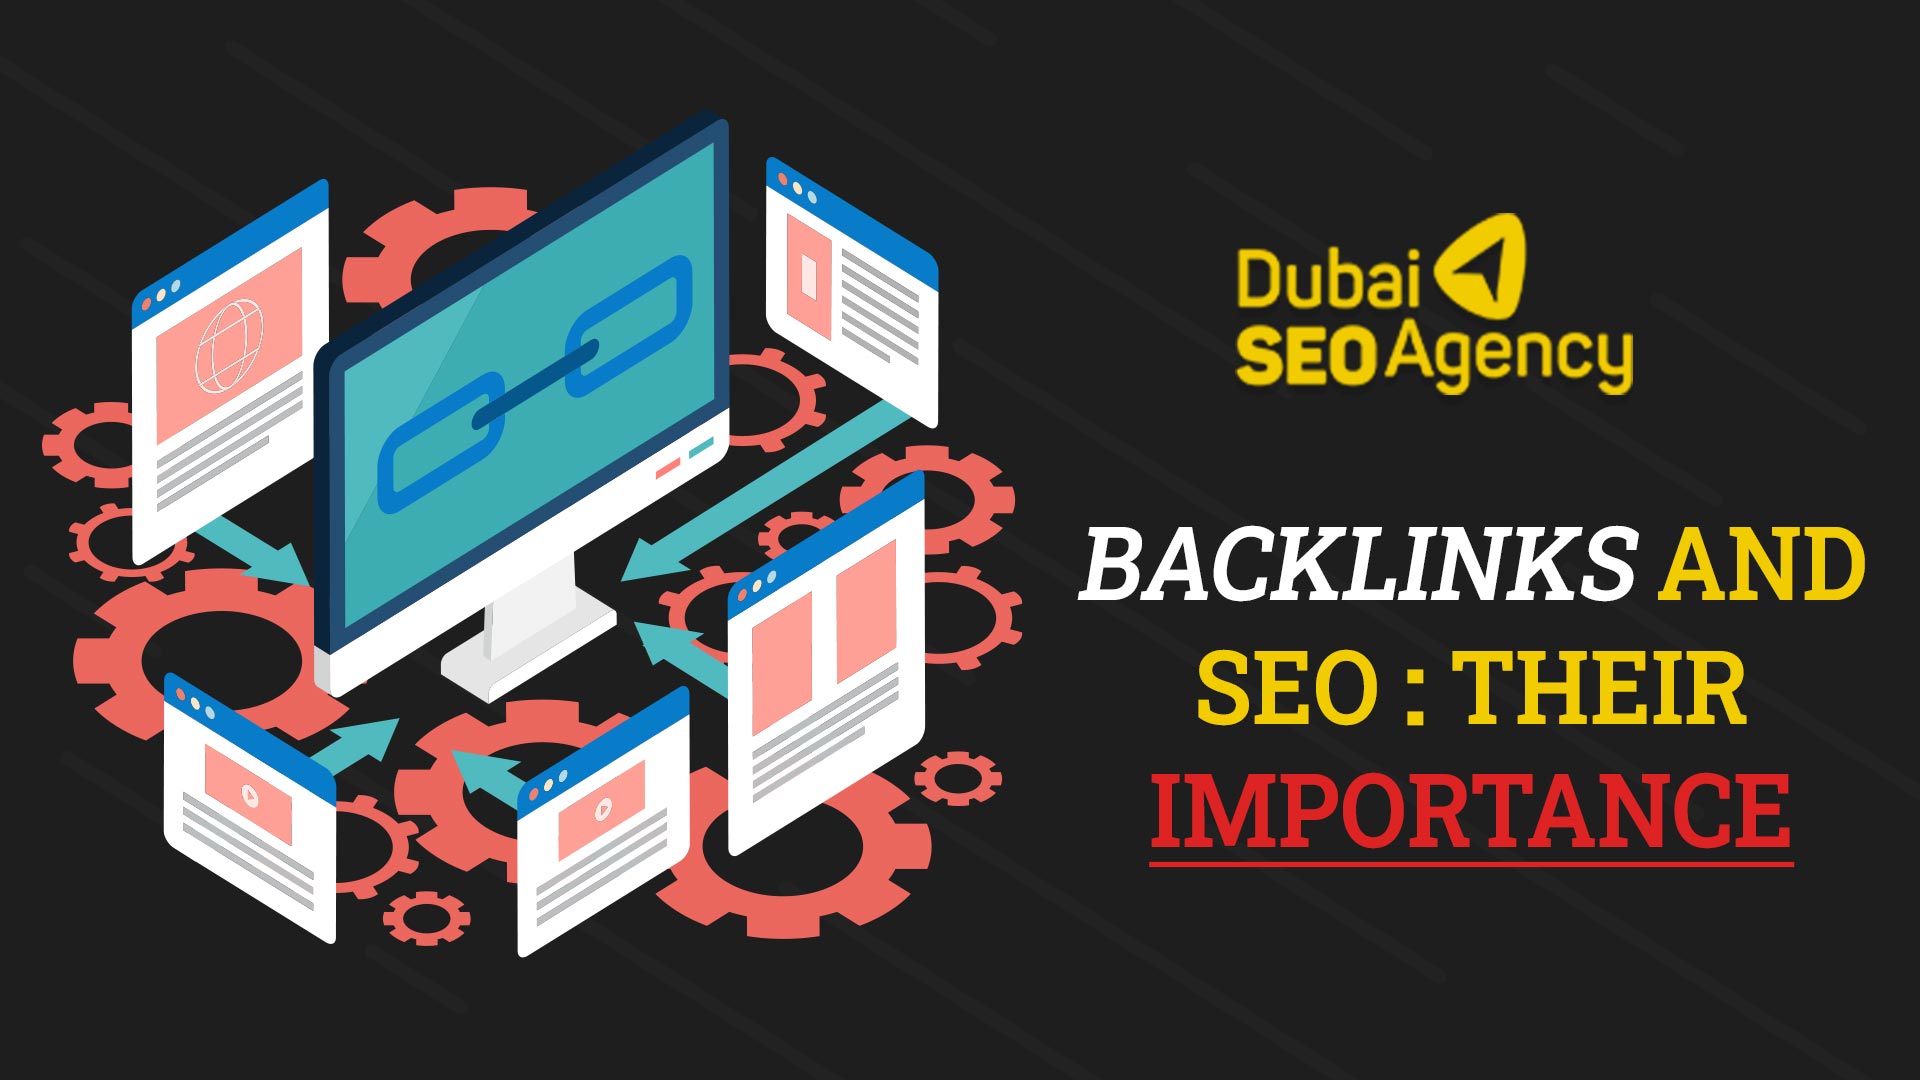 Backlinks and seo: their importance